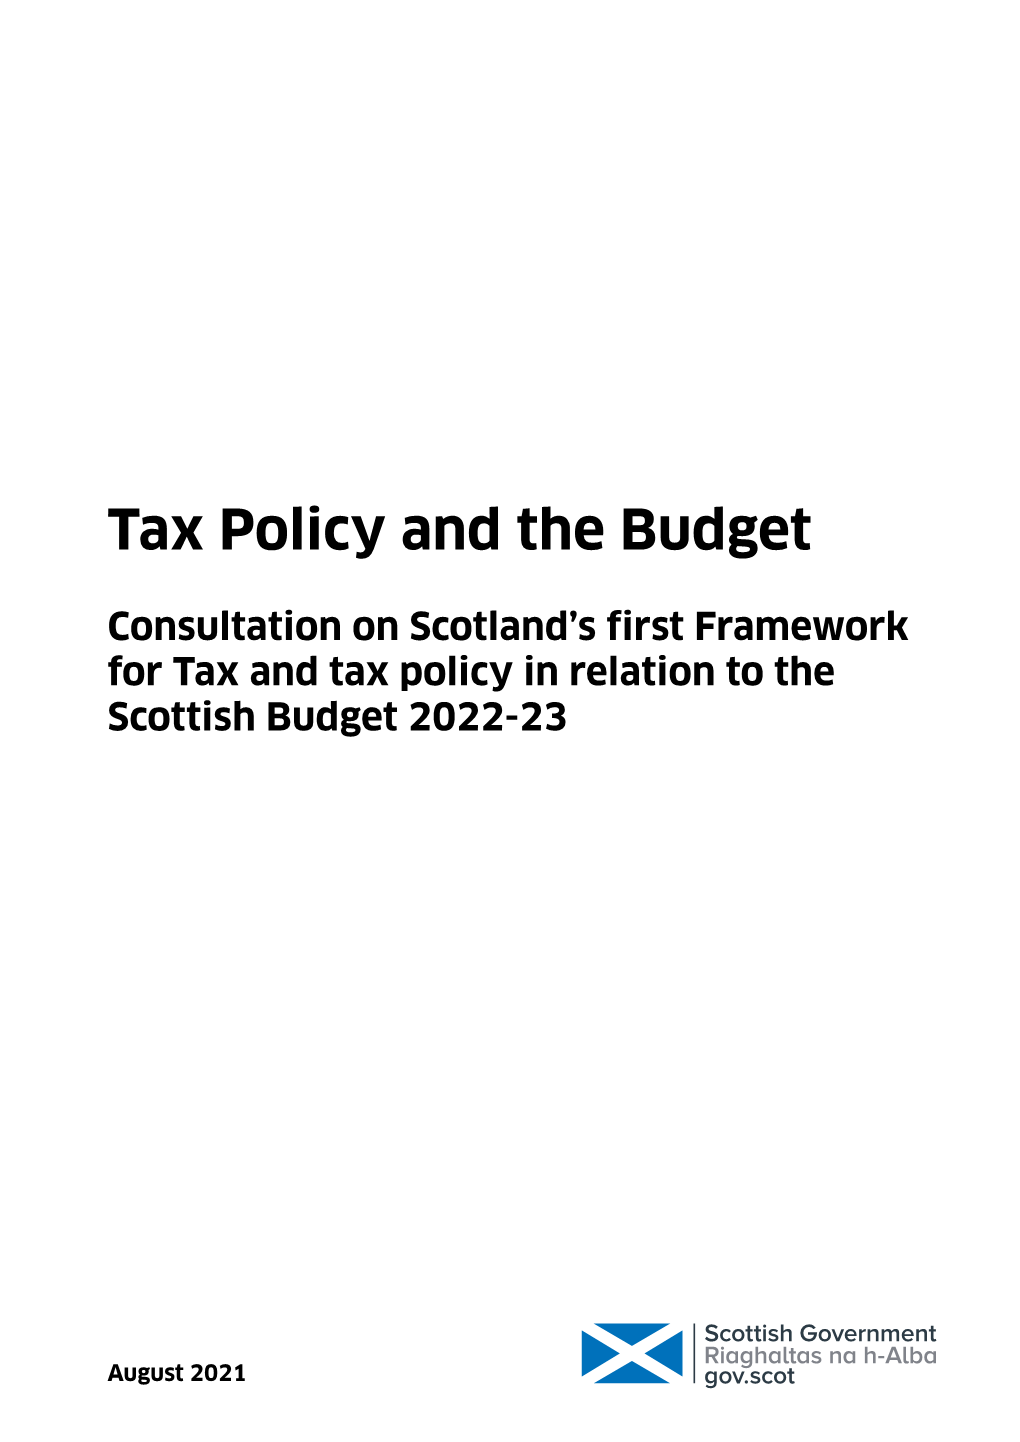 Consultation on Scotland's First Framework for Tax and Tax Policy In